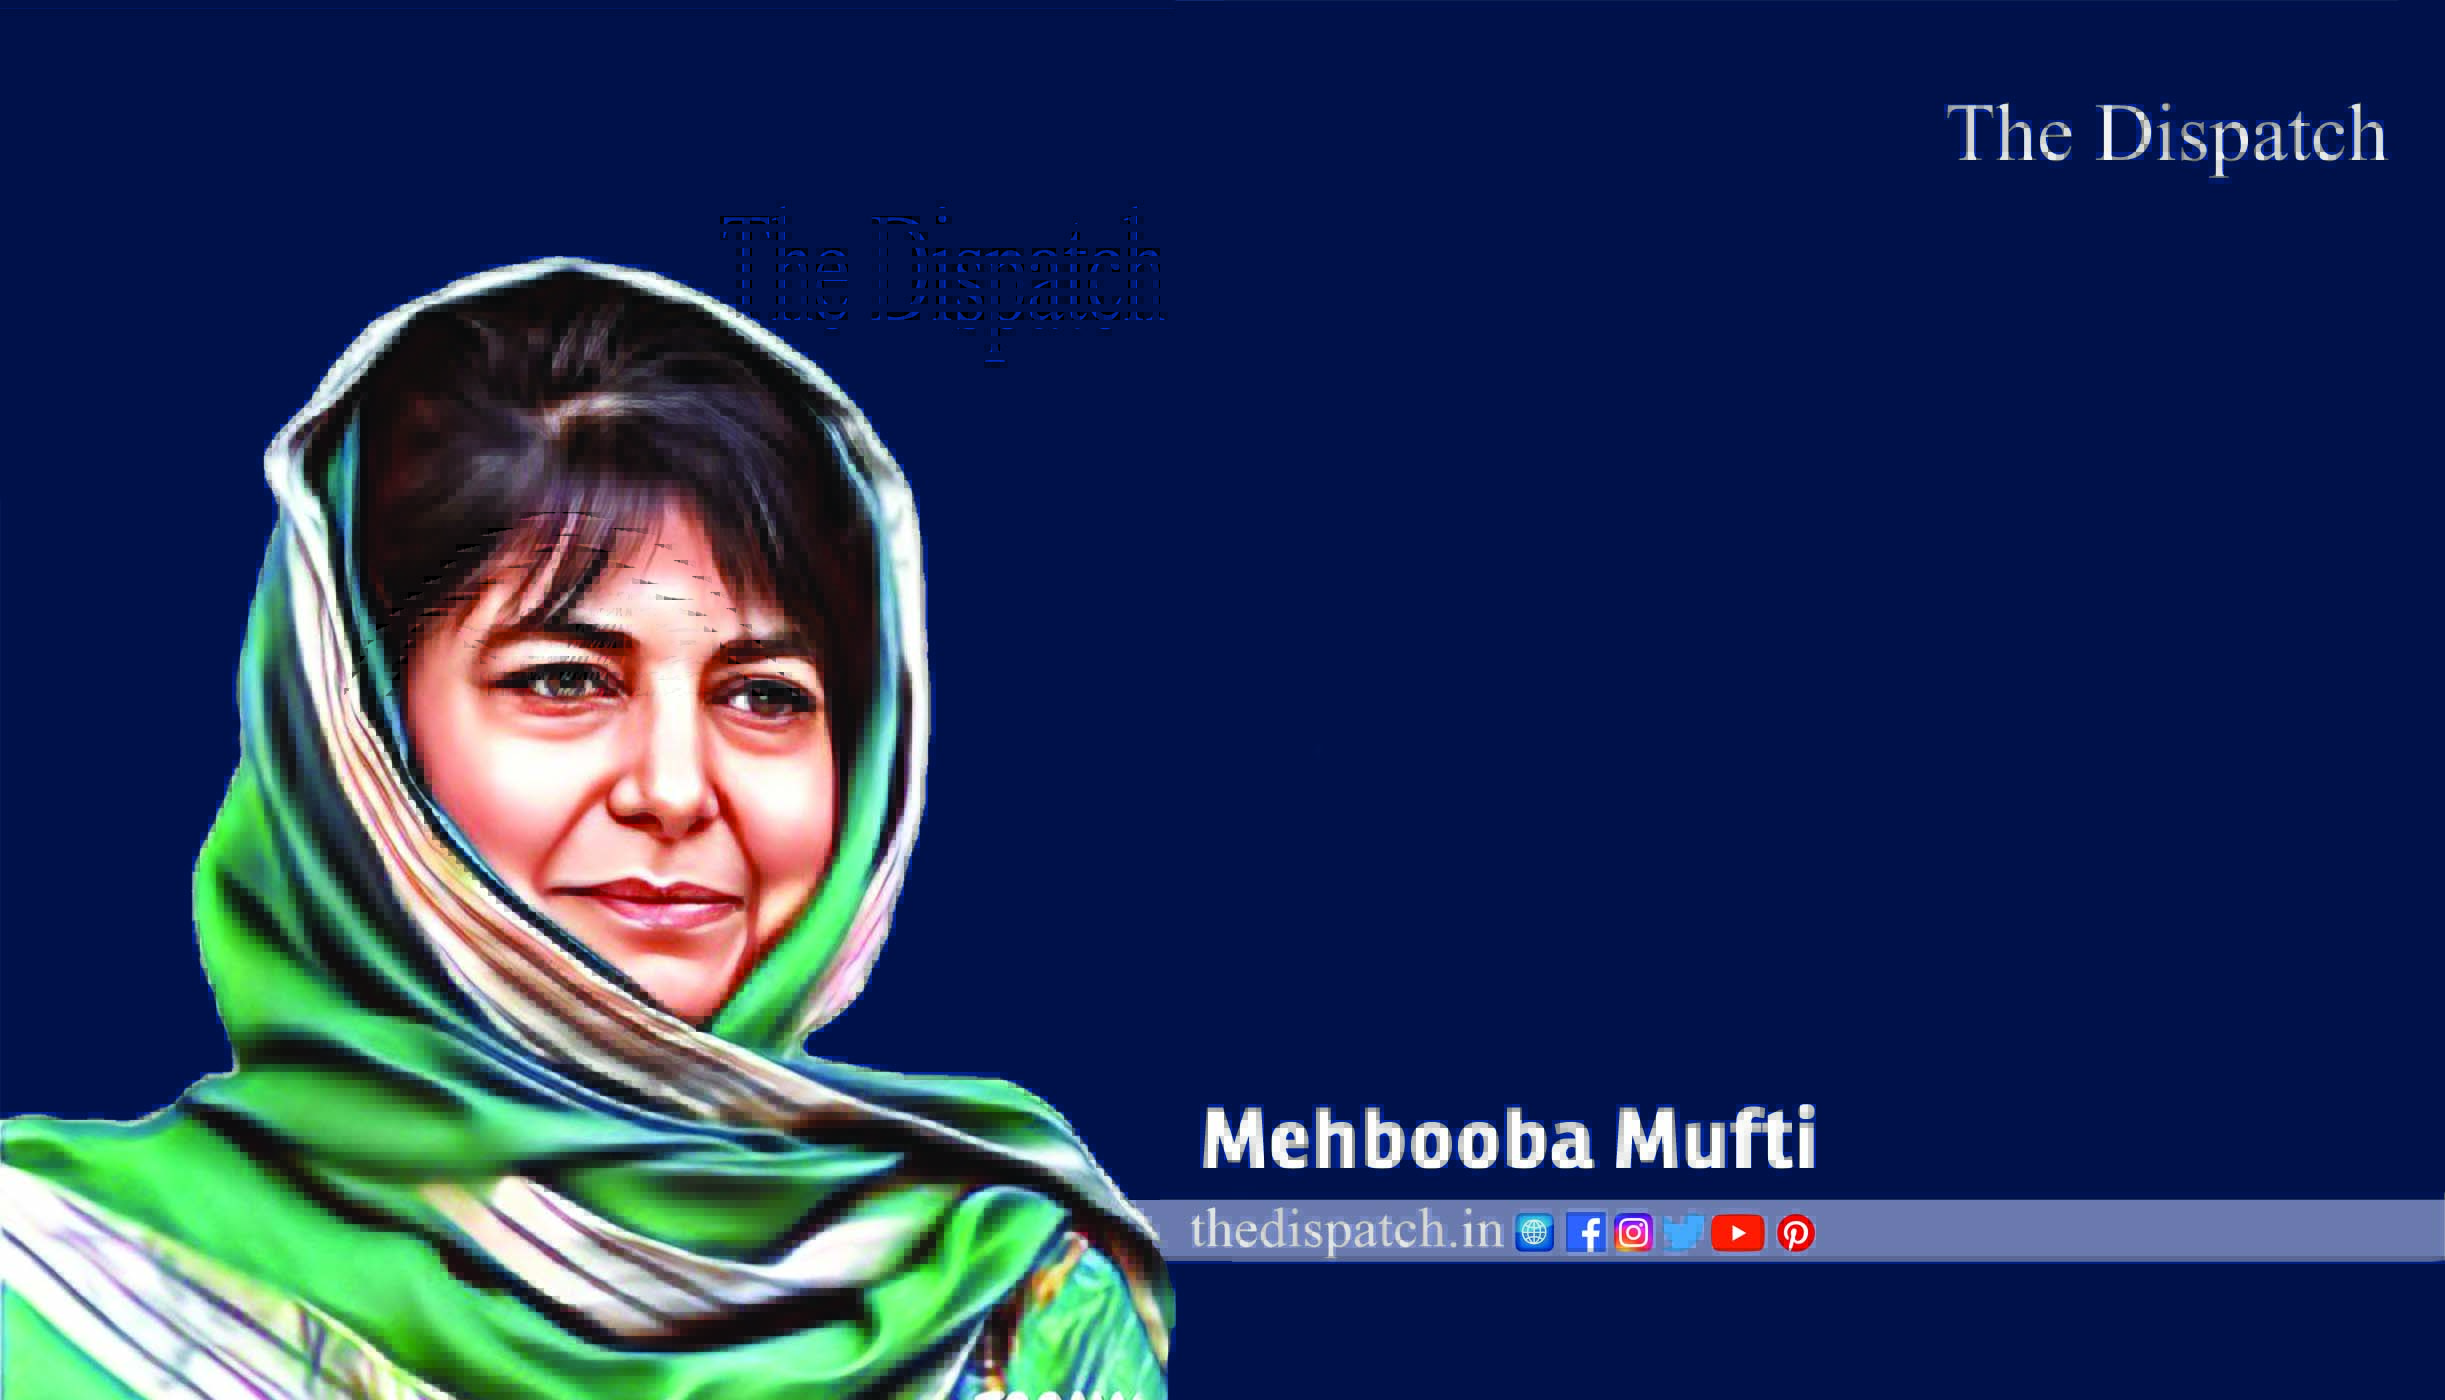 Mehbooba accuses J&K administration of trying to ‘fix’ LS elections